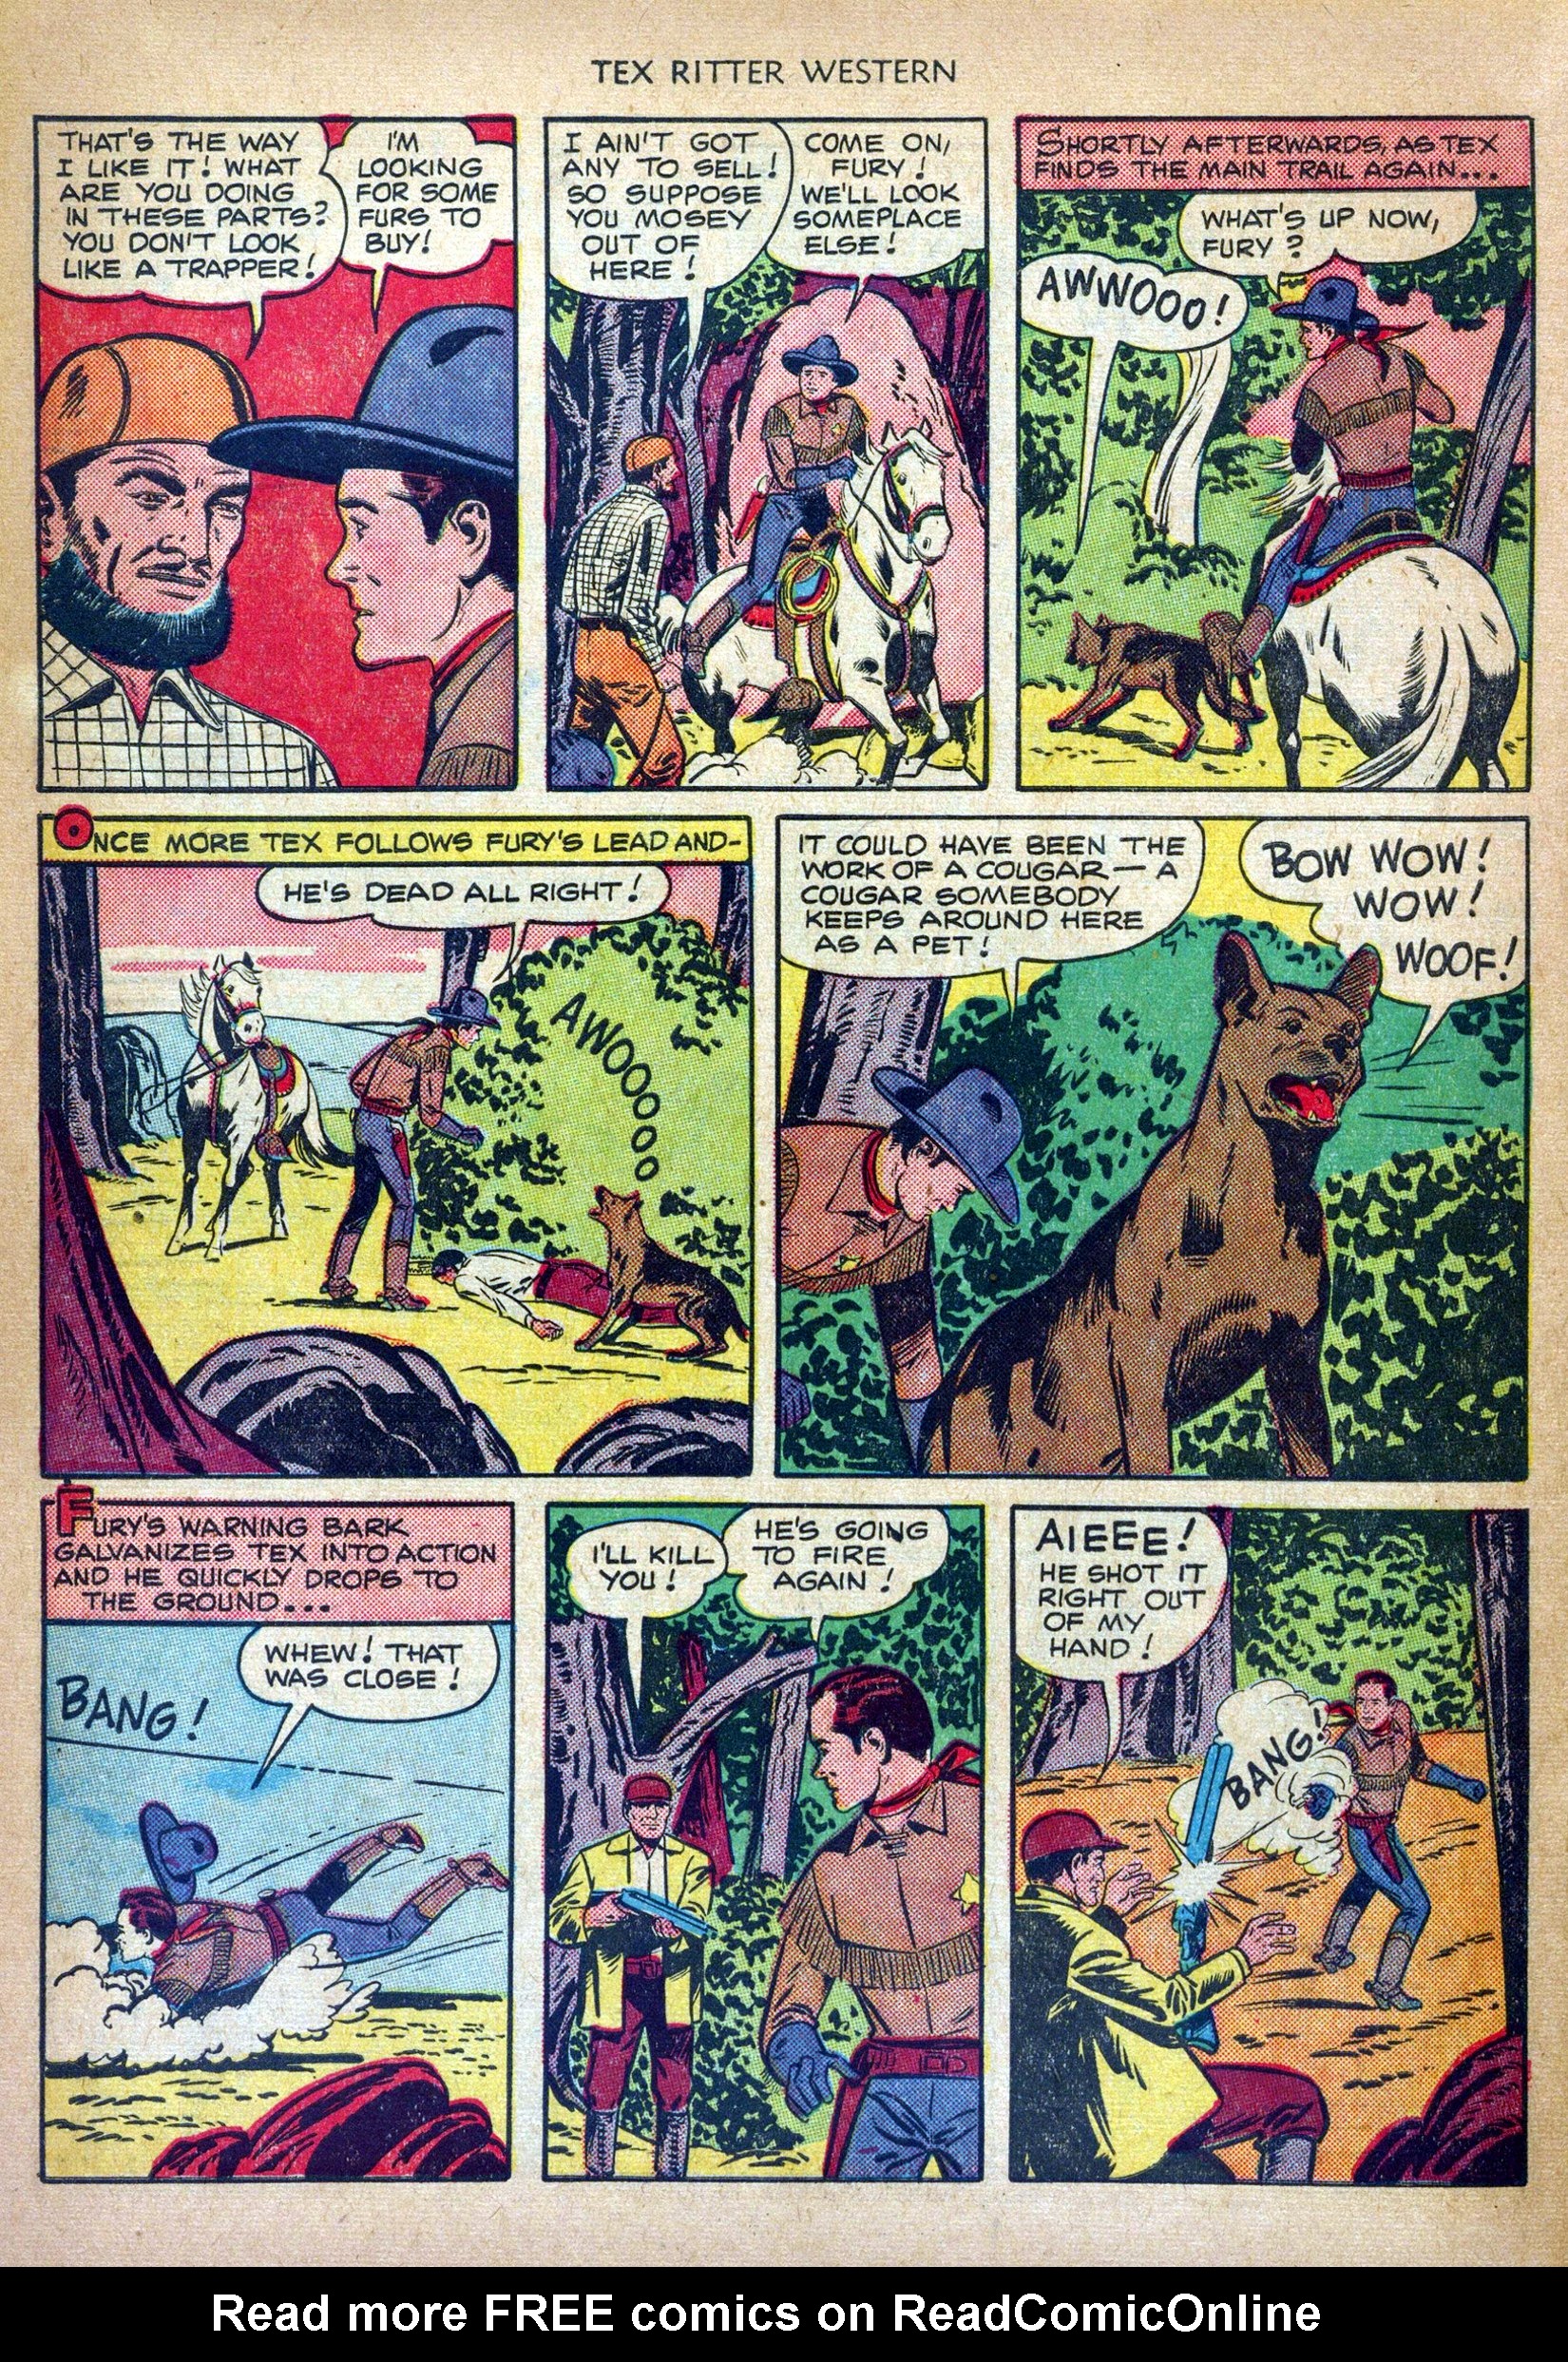 Read online Tex Ritter Western comic -  Issue #4 - 30